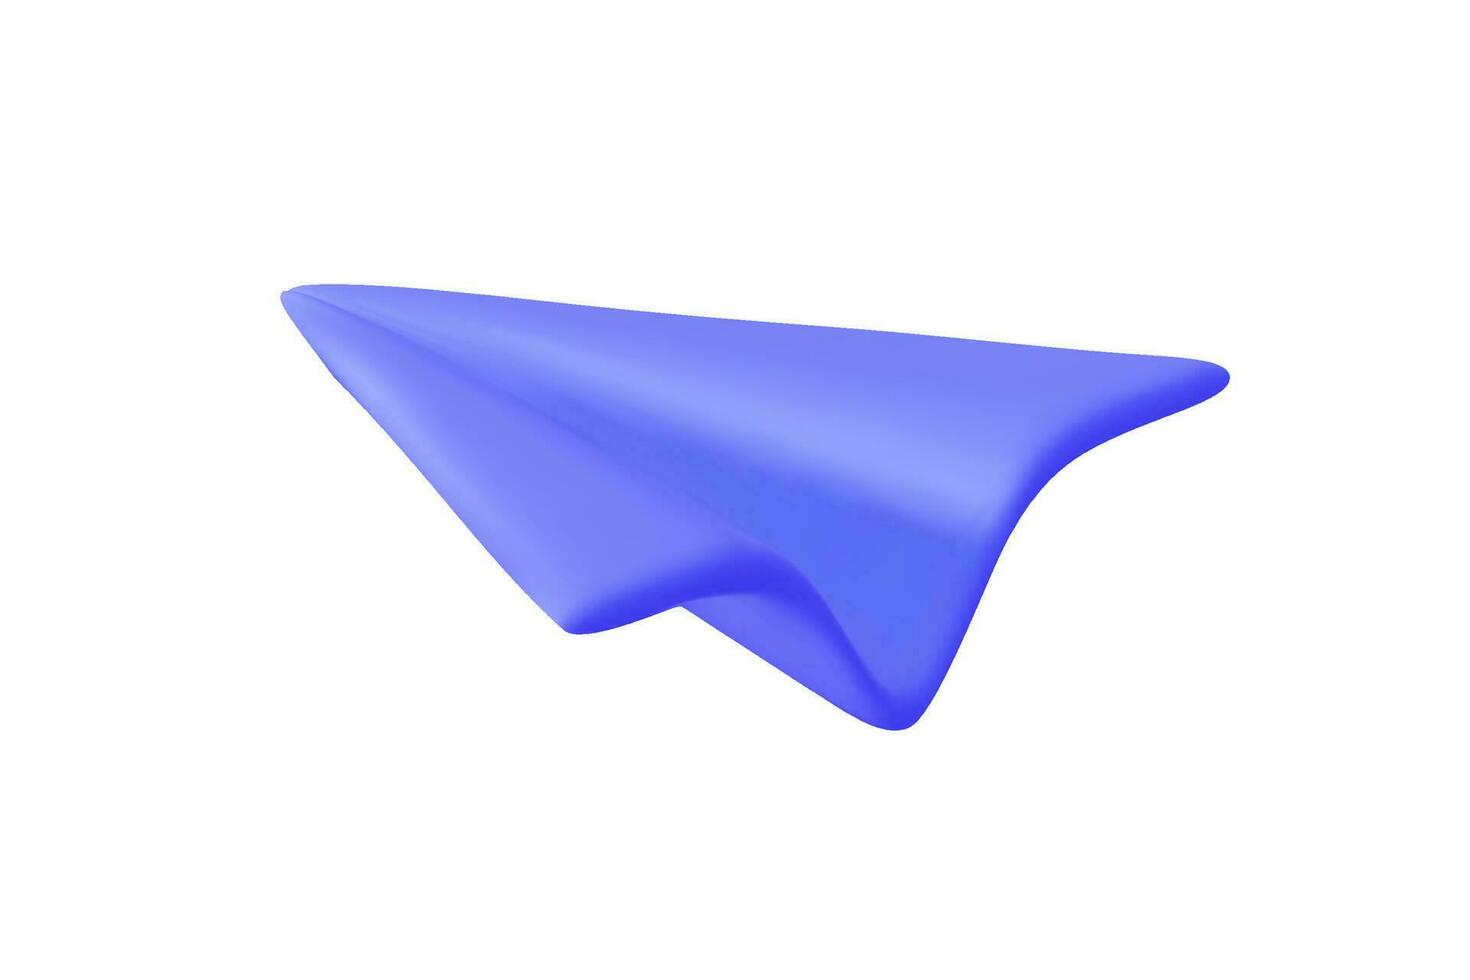 3D render purple vector paper airplane icon. Send information concept. Vector illustration on white background. Rear view